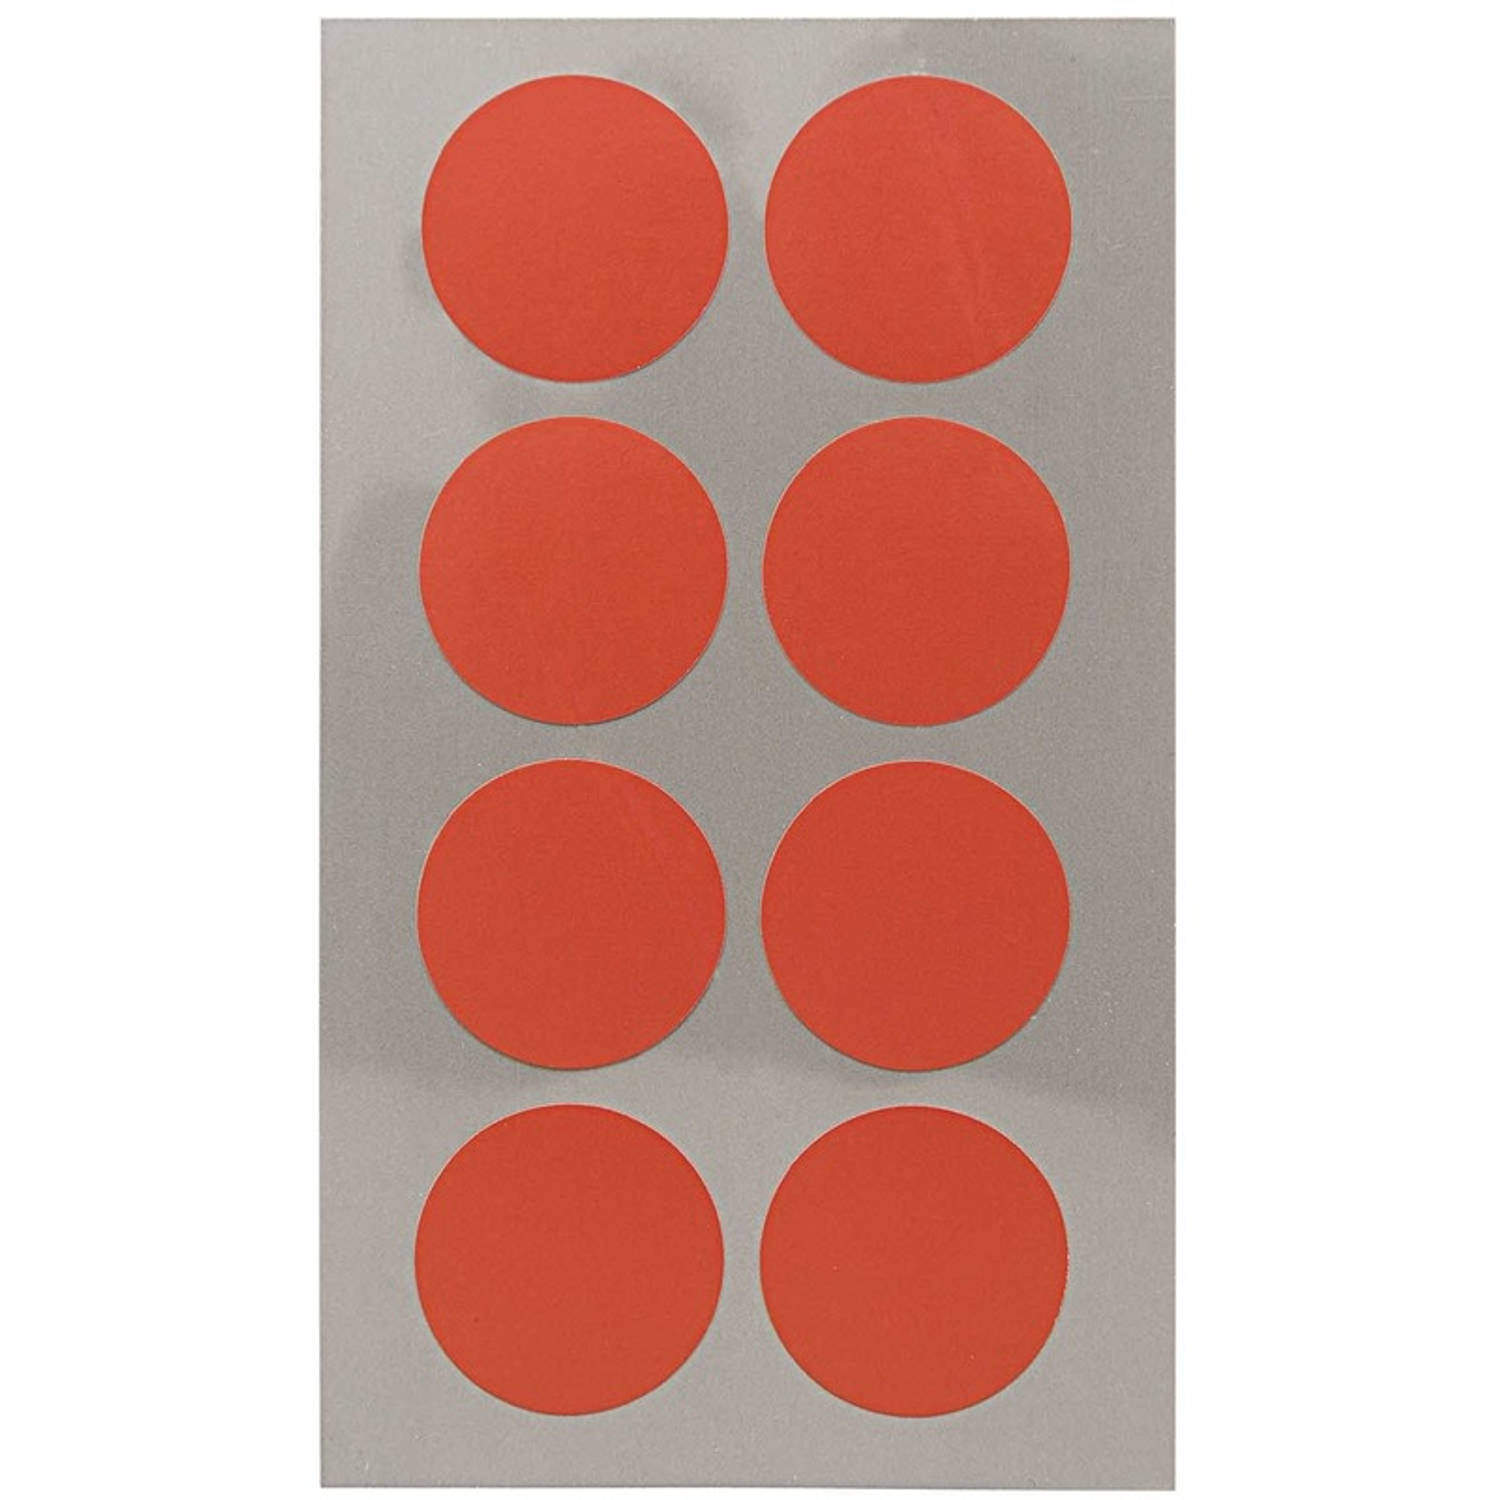 32x Stippen Stickers 25 Mm - Stickers - Rood